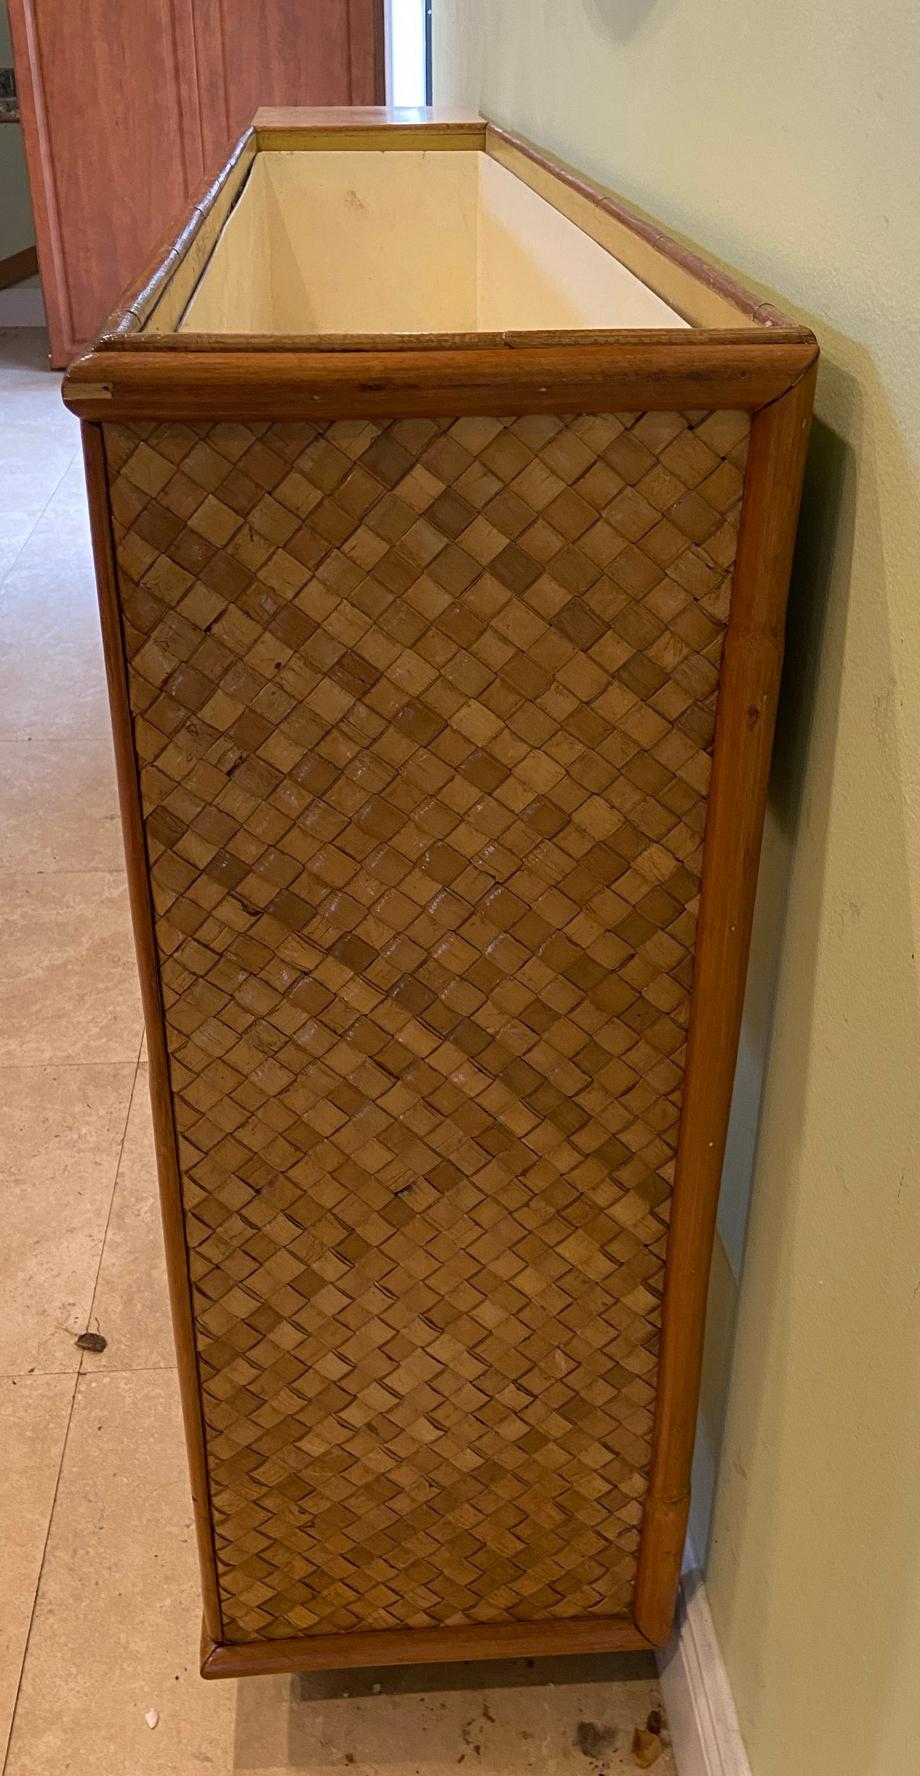 Vintage Rattan Shelf Display Unit with Built in Planter Room Divider Circa 1950s In Good Condition For Sale In West Palm Beach, FL